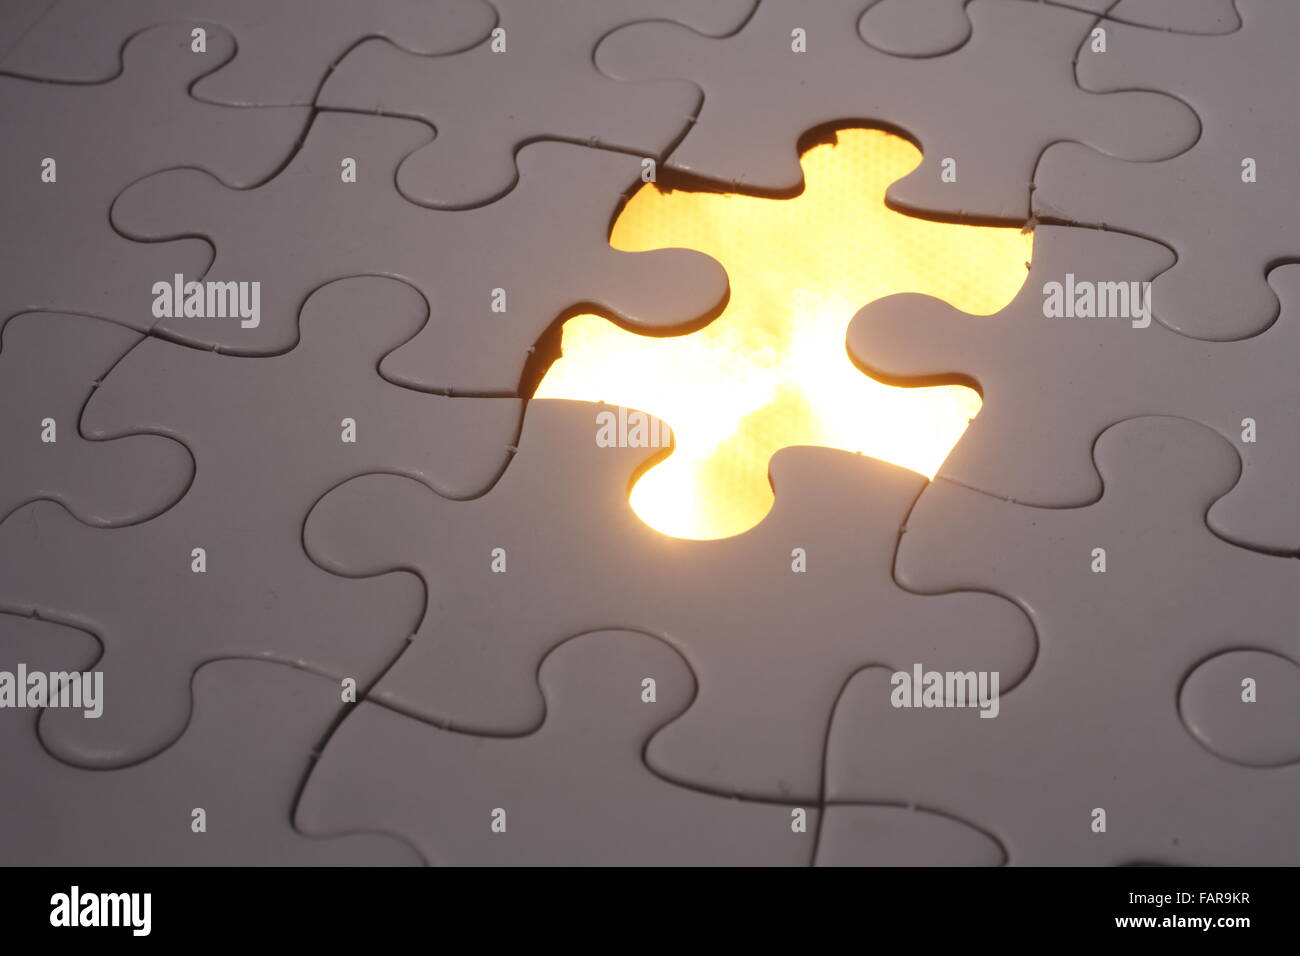 Jigsaw puzzle placed over light. Stock Photo